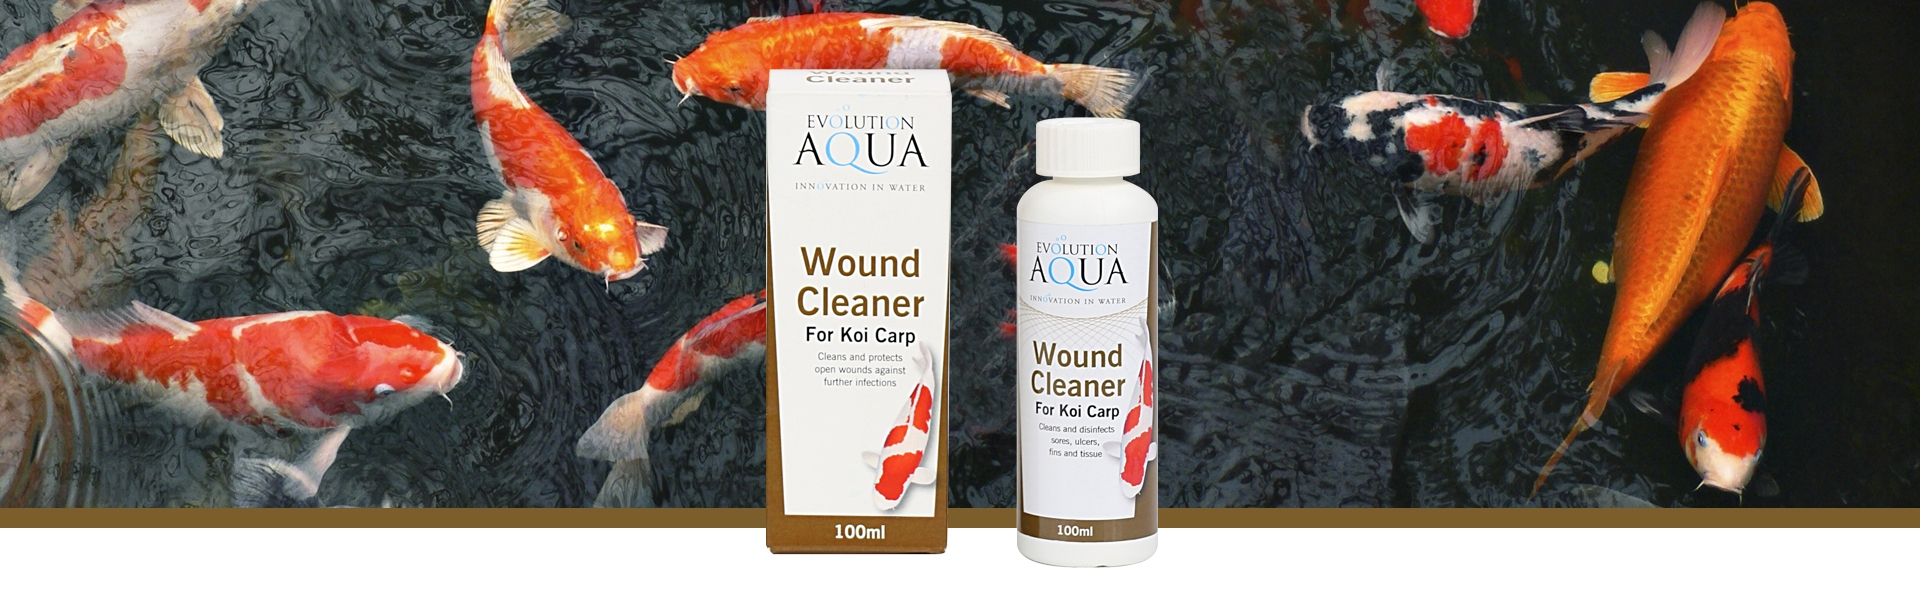 eaMedications Wound Cleaner